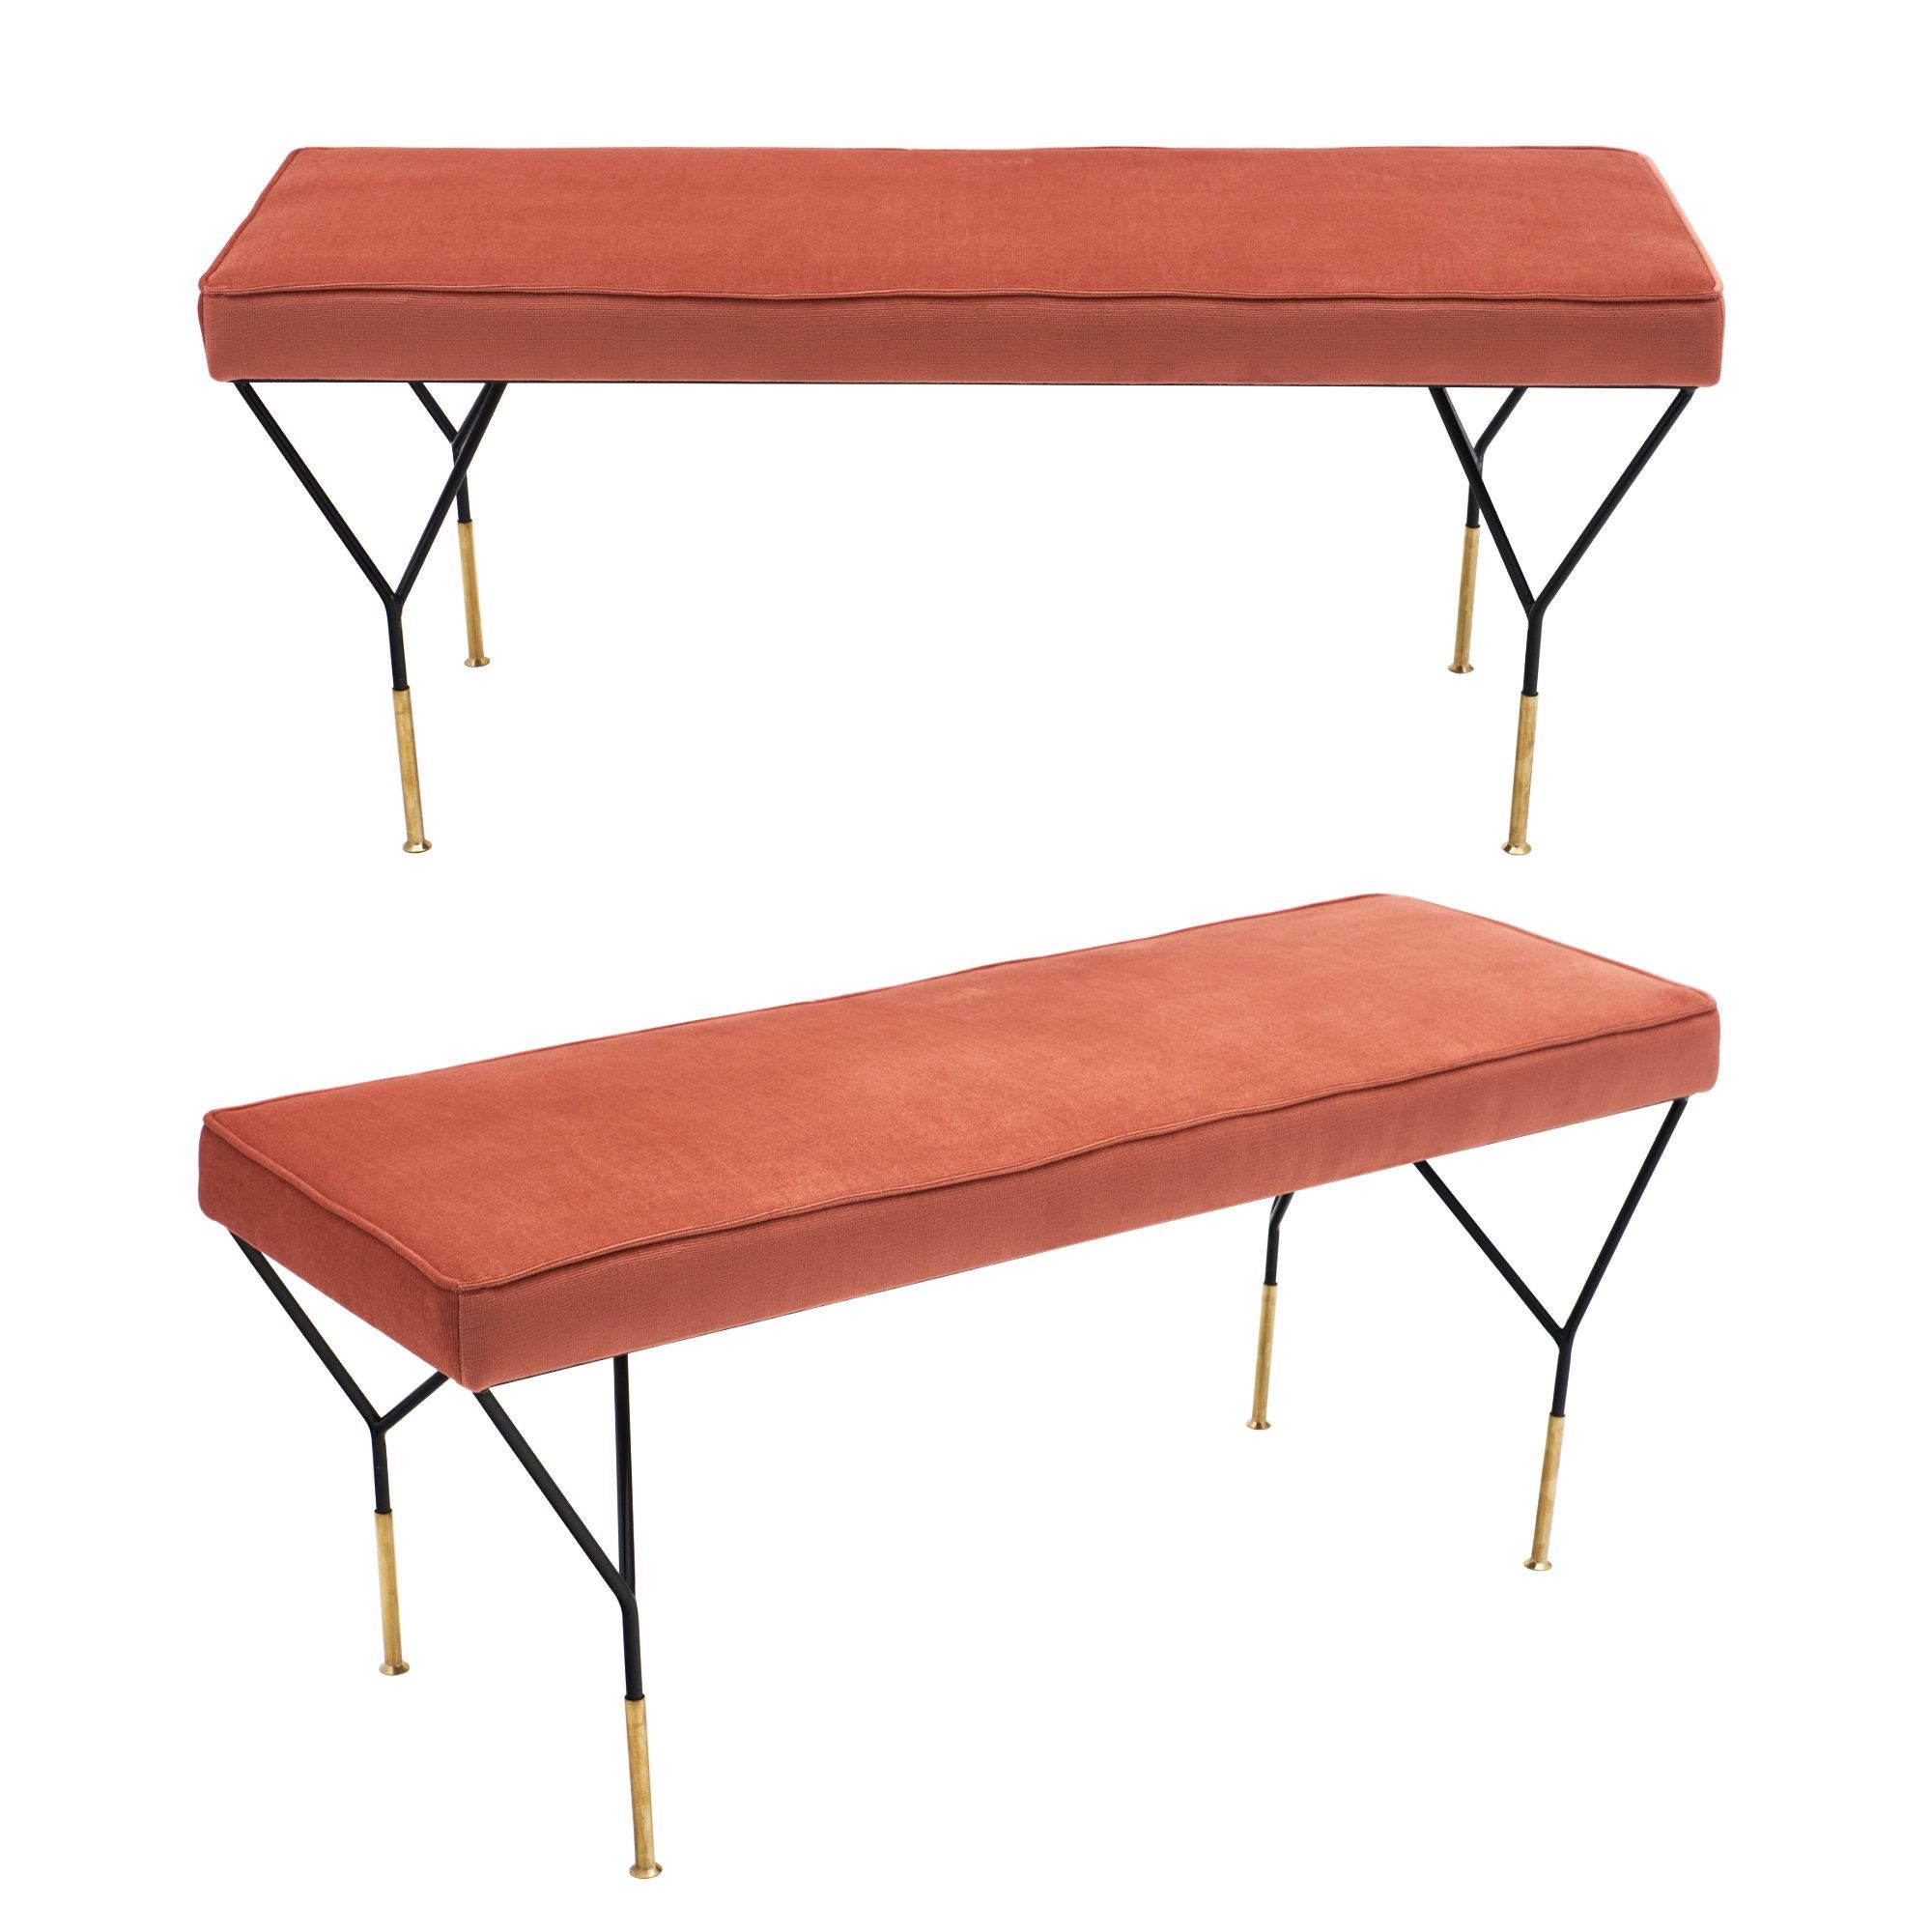 Vintage Midcentury Pink Benches Attributed to Carlo di Carli